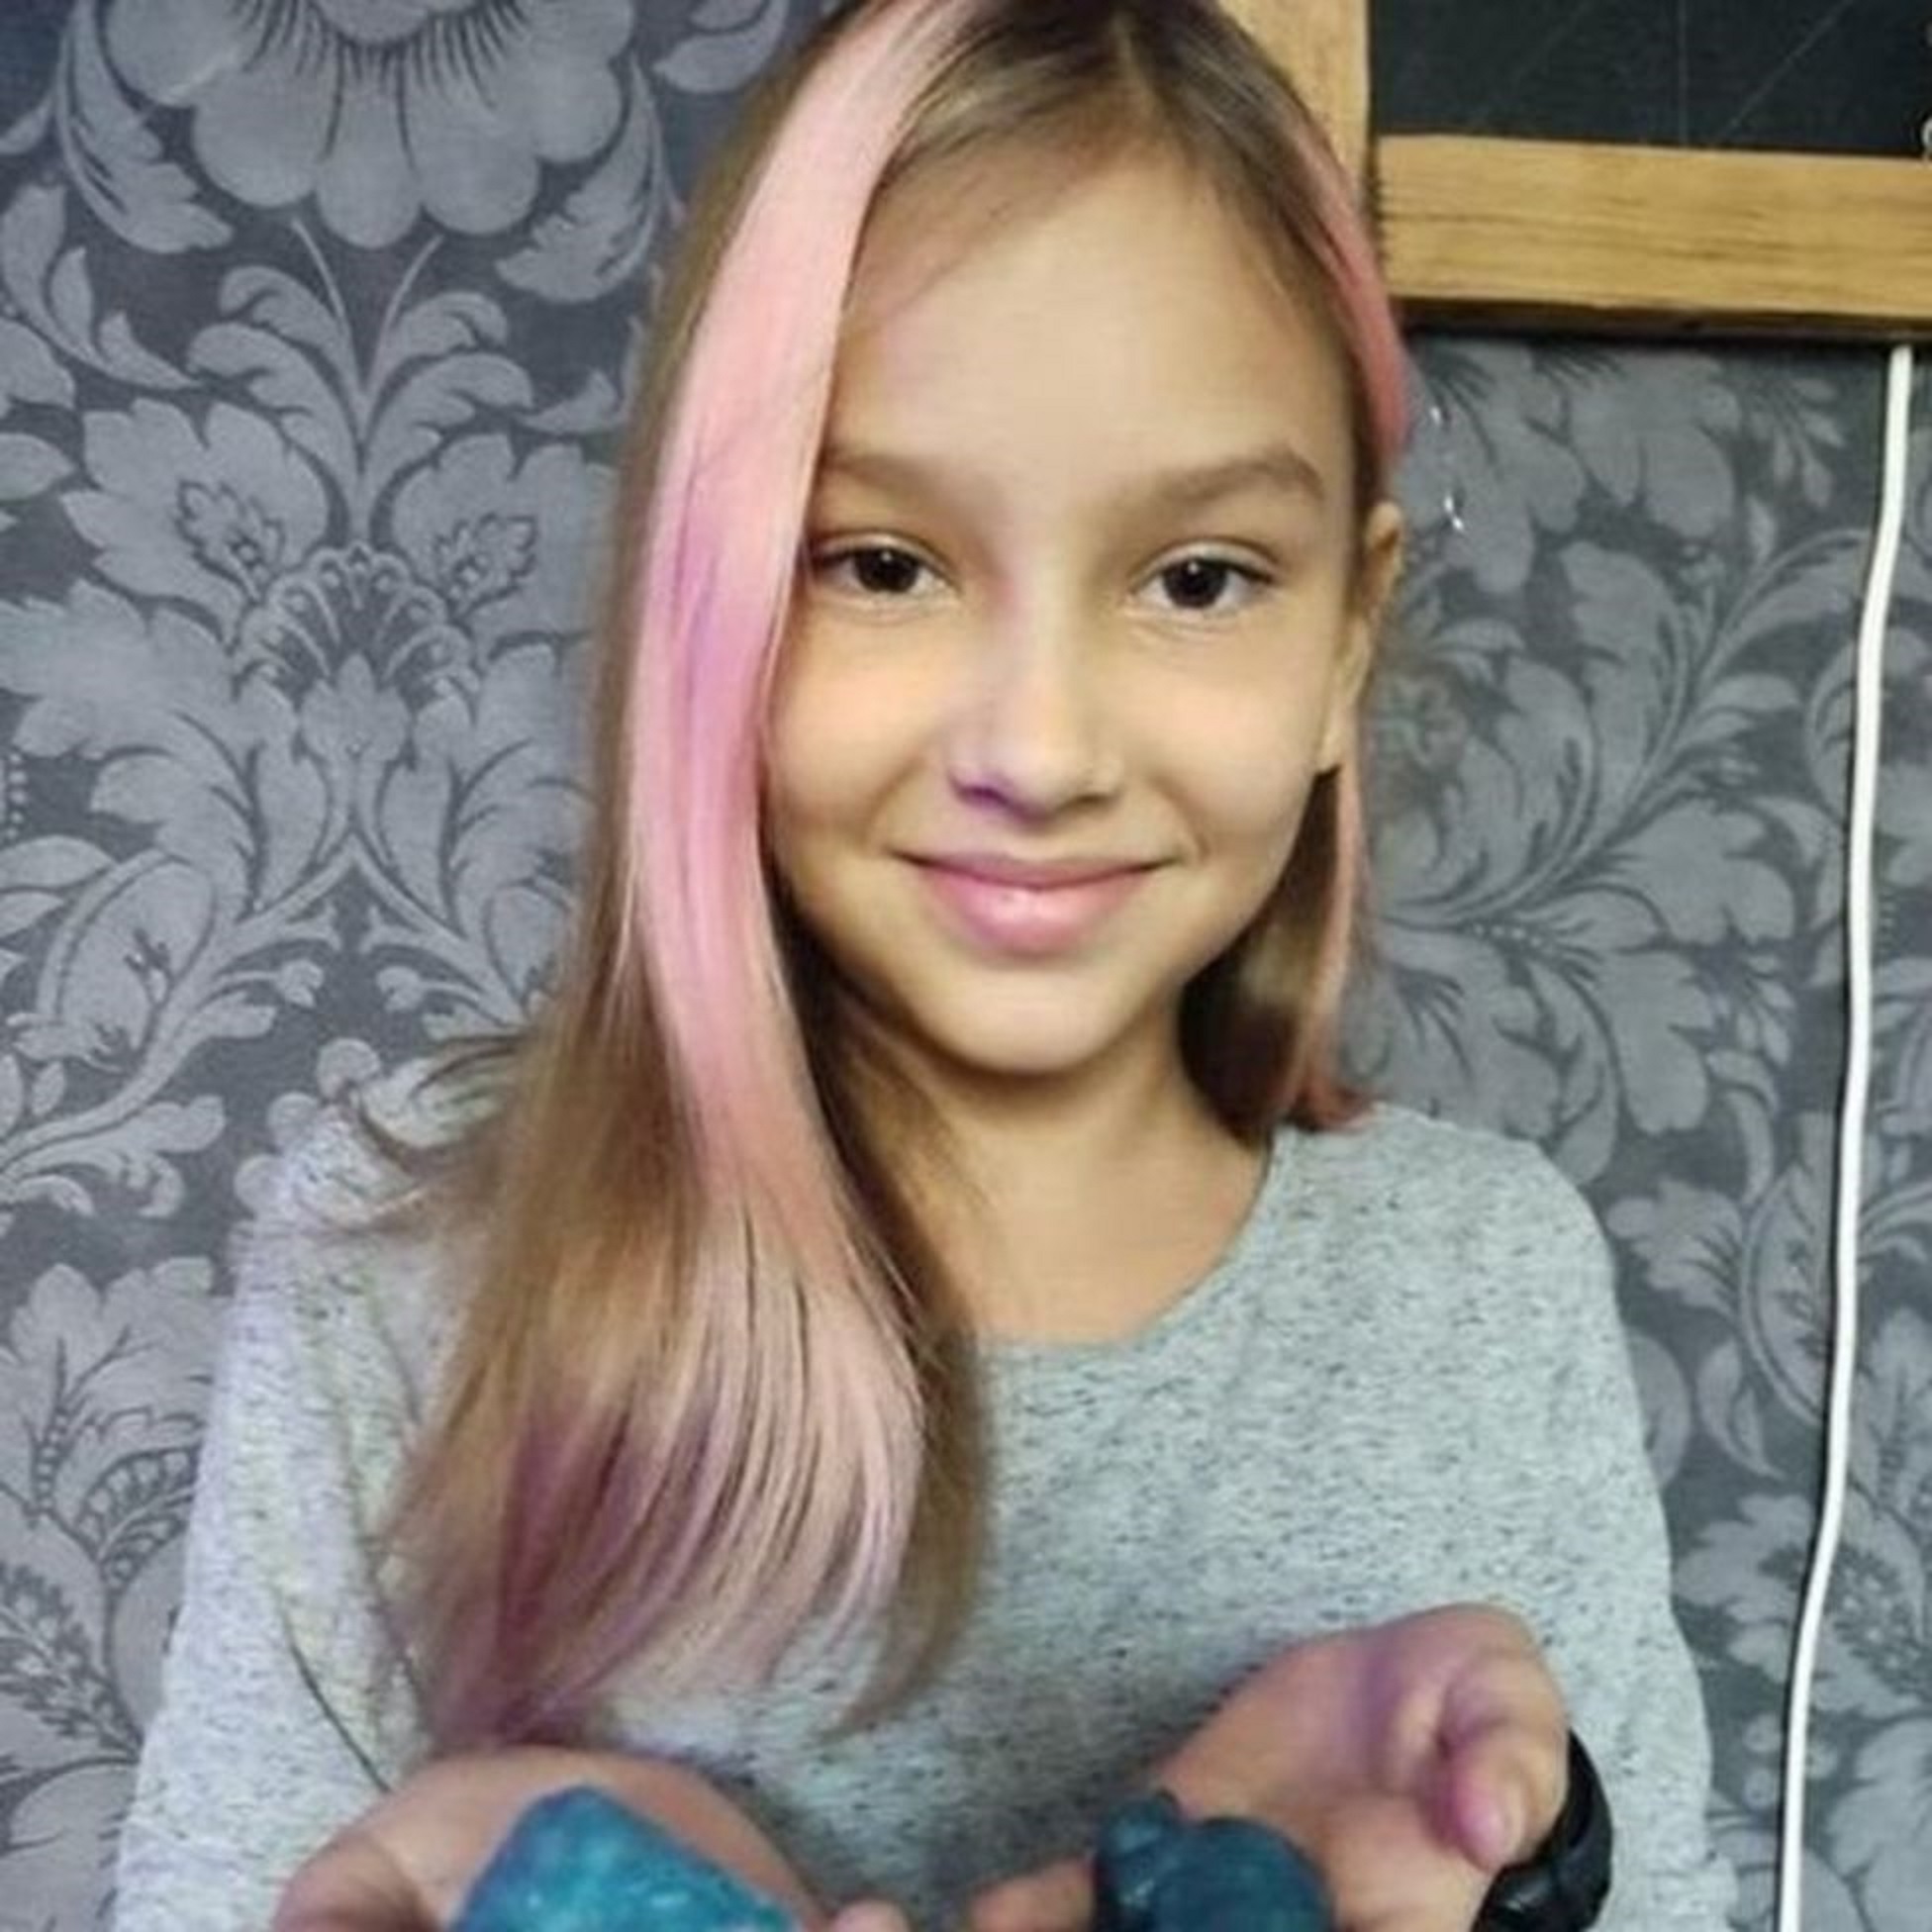 Polina, a young girl killed in Ukraine